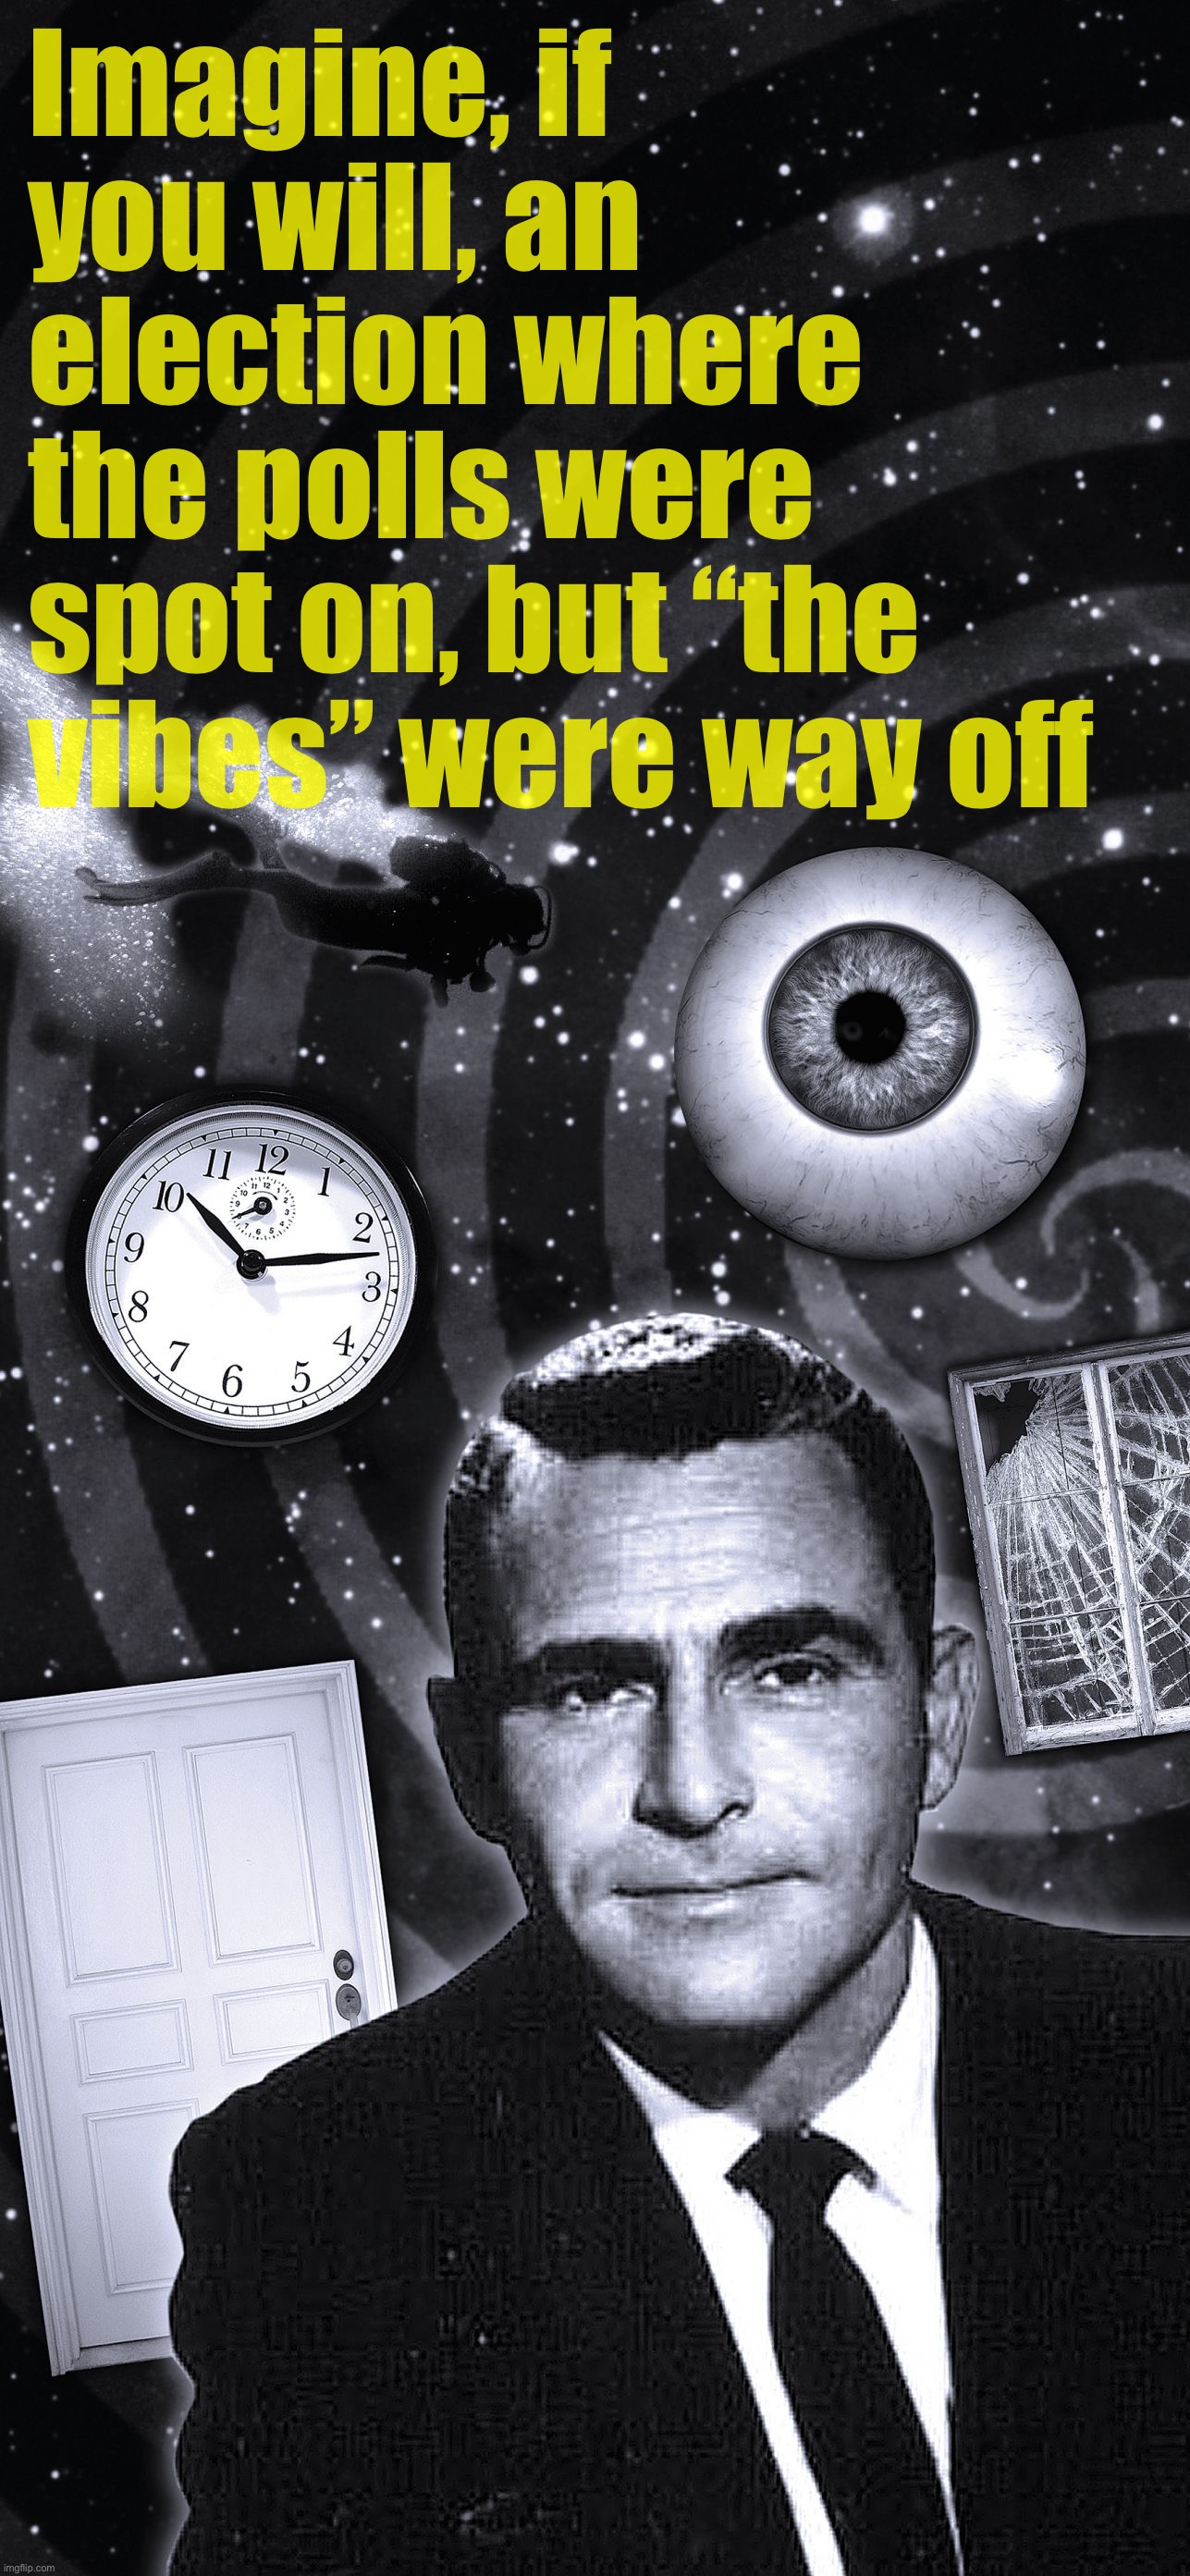 Vibes said “red wave.” Polls said virtual tie. Nobody believed them. For once, the polls had it. | Imagine, if you will, an election where the polls were spot on, but “the vibes” were way off | image tagged in twilight zone,polls,elections,2022,midterms,politics | made w/ Imgflip meme maker